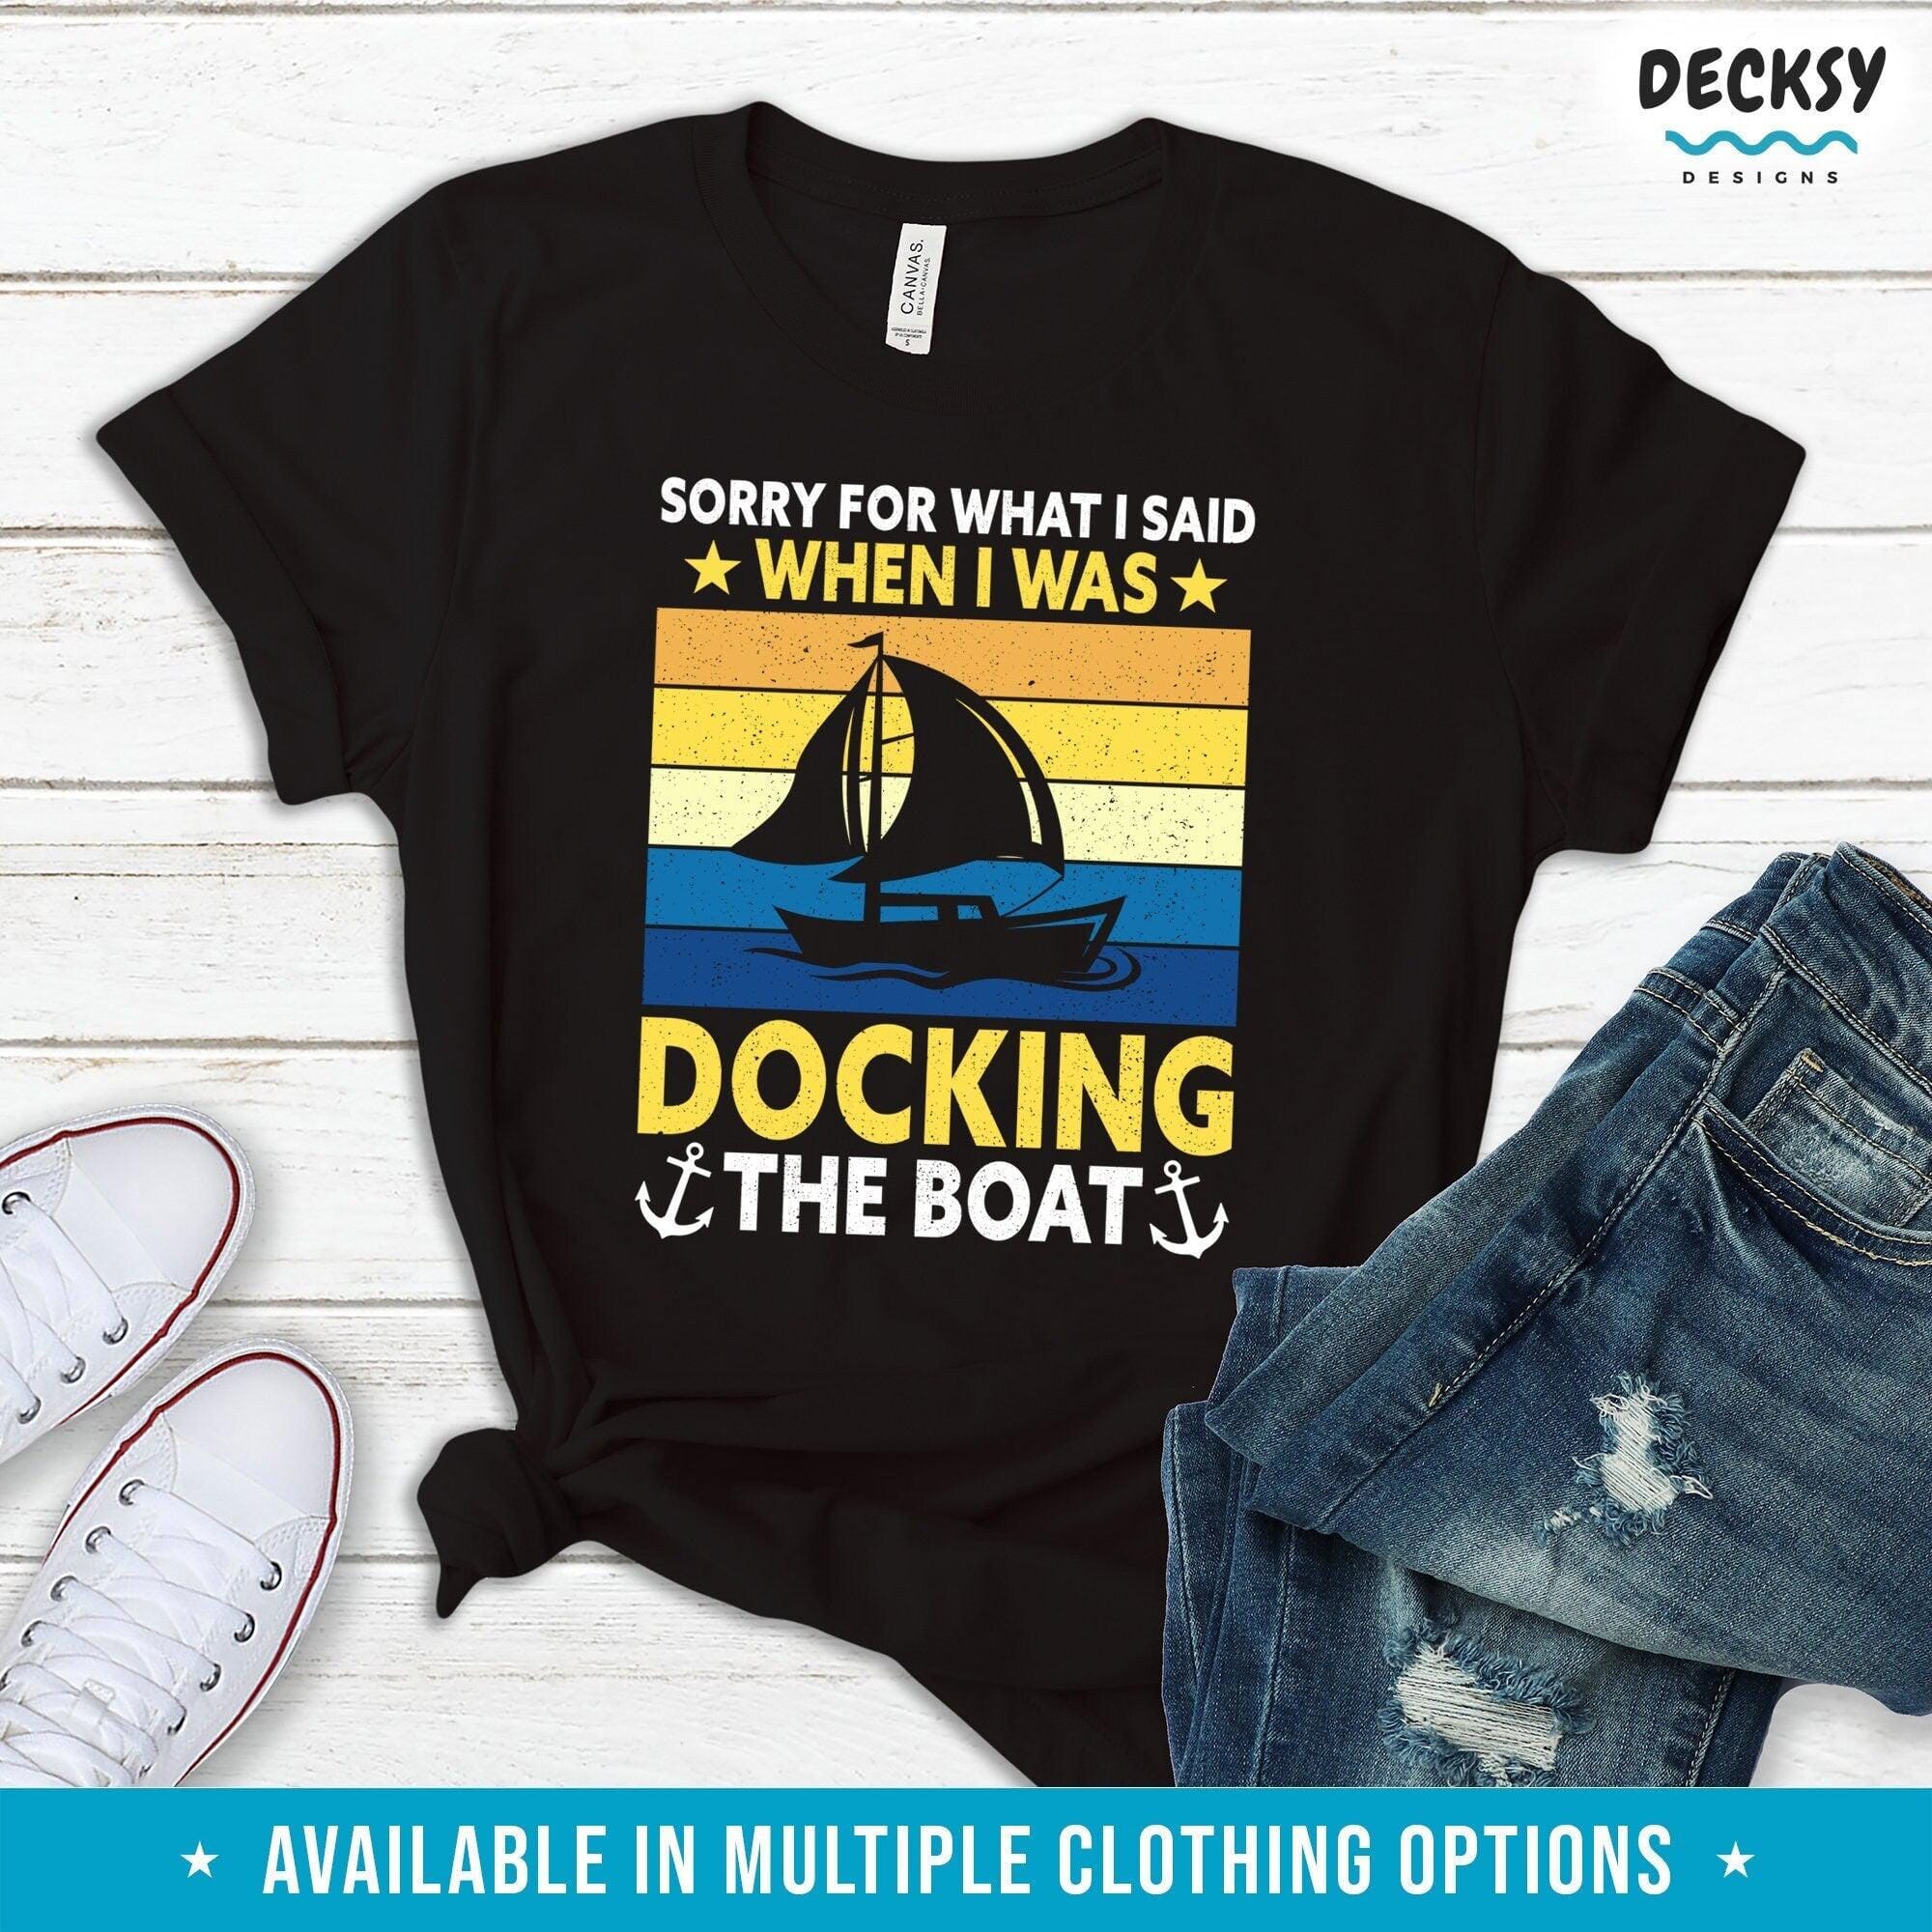 Sailing Shirt, Boater Sailor Gifts-Clothing:Gender-Neutral Adult Clothing:Tops & Tees:T-shirts:Graphic Tees-DecksyDesigns